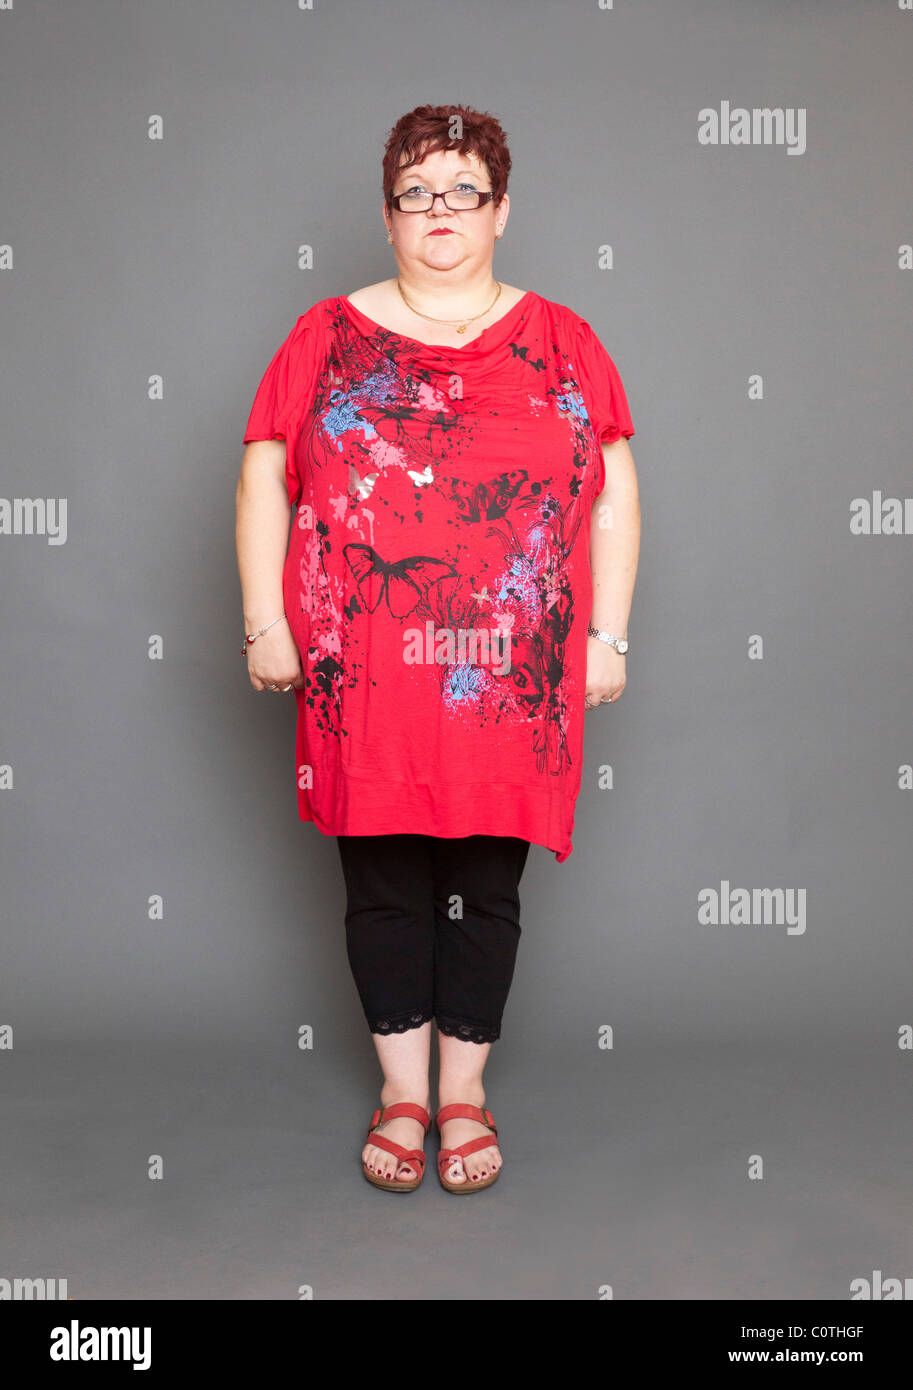 overweight woman standing upright Stock Photo